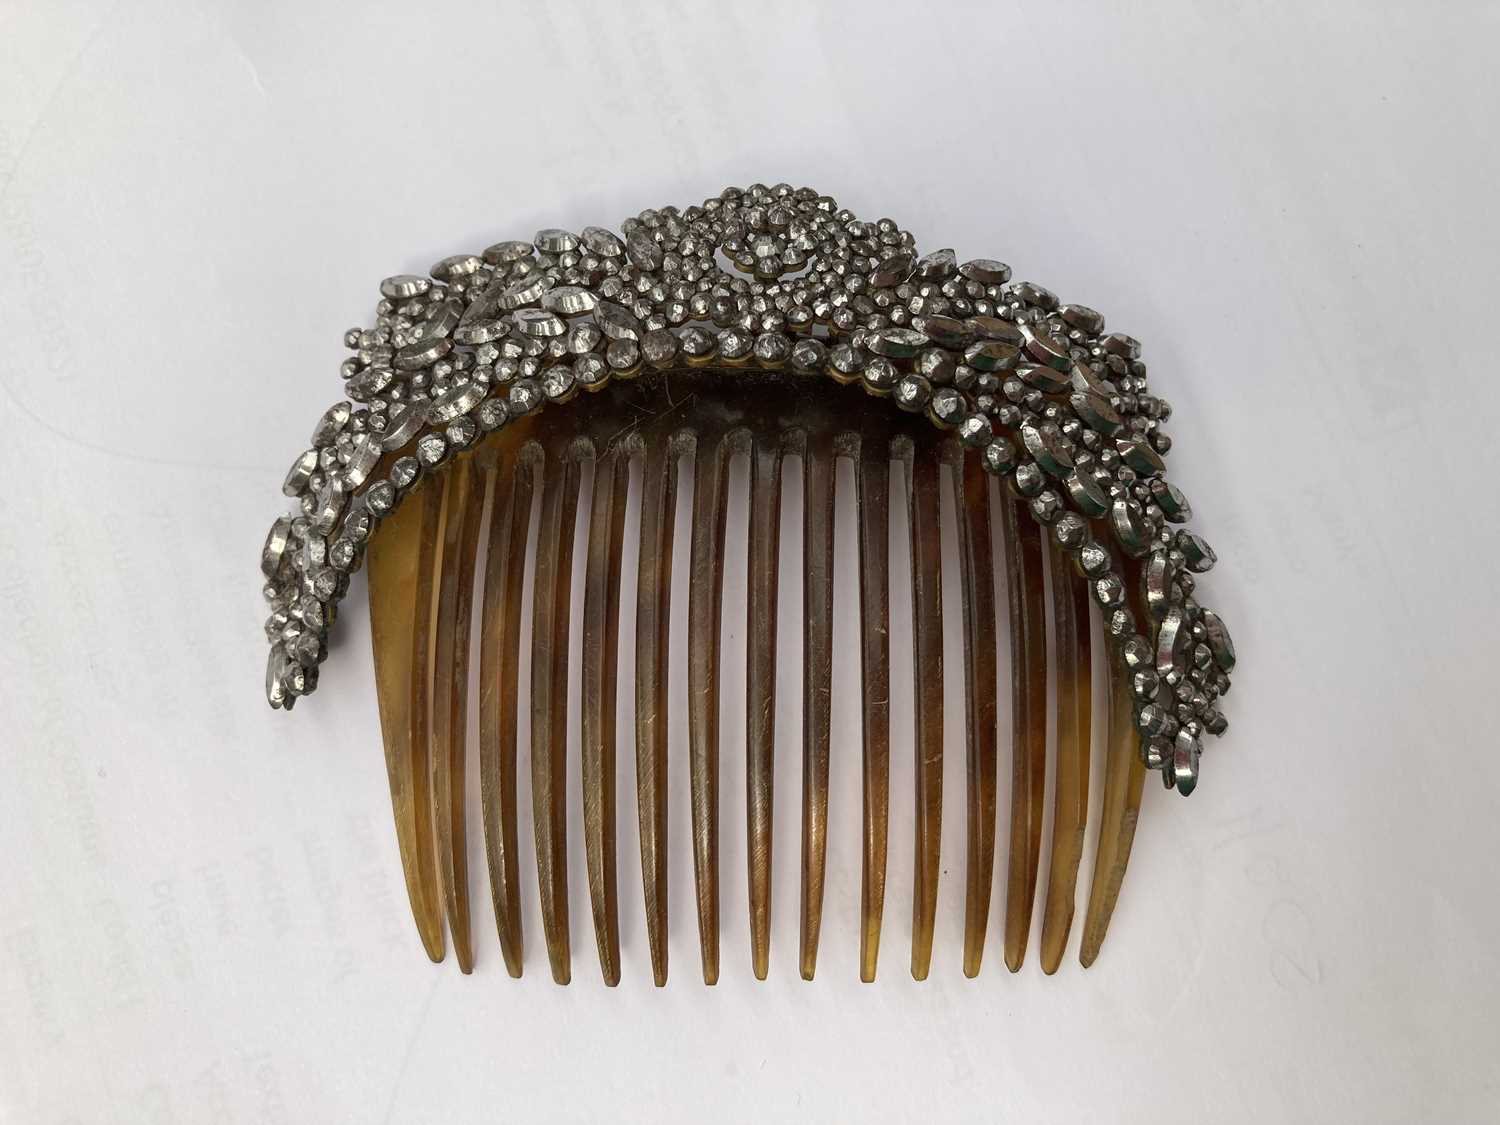 19th Century and Later Cut Steel Jewellery, comprising a decorative tiara with rotating flower heads - Image 10 of 19